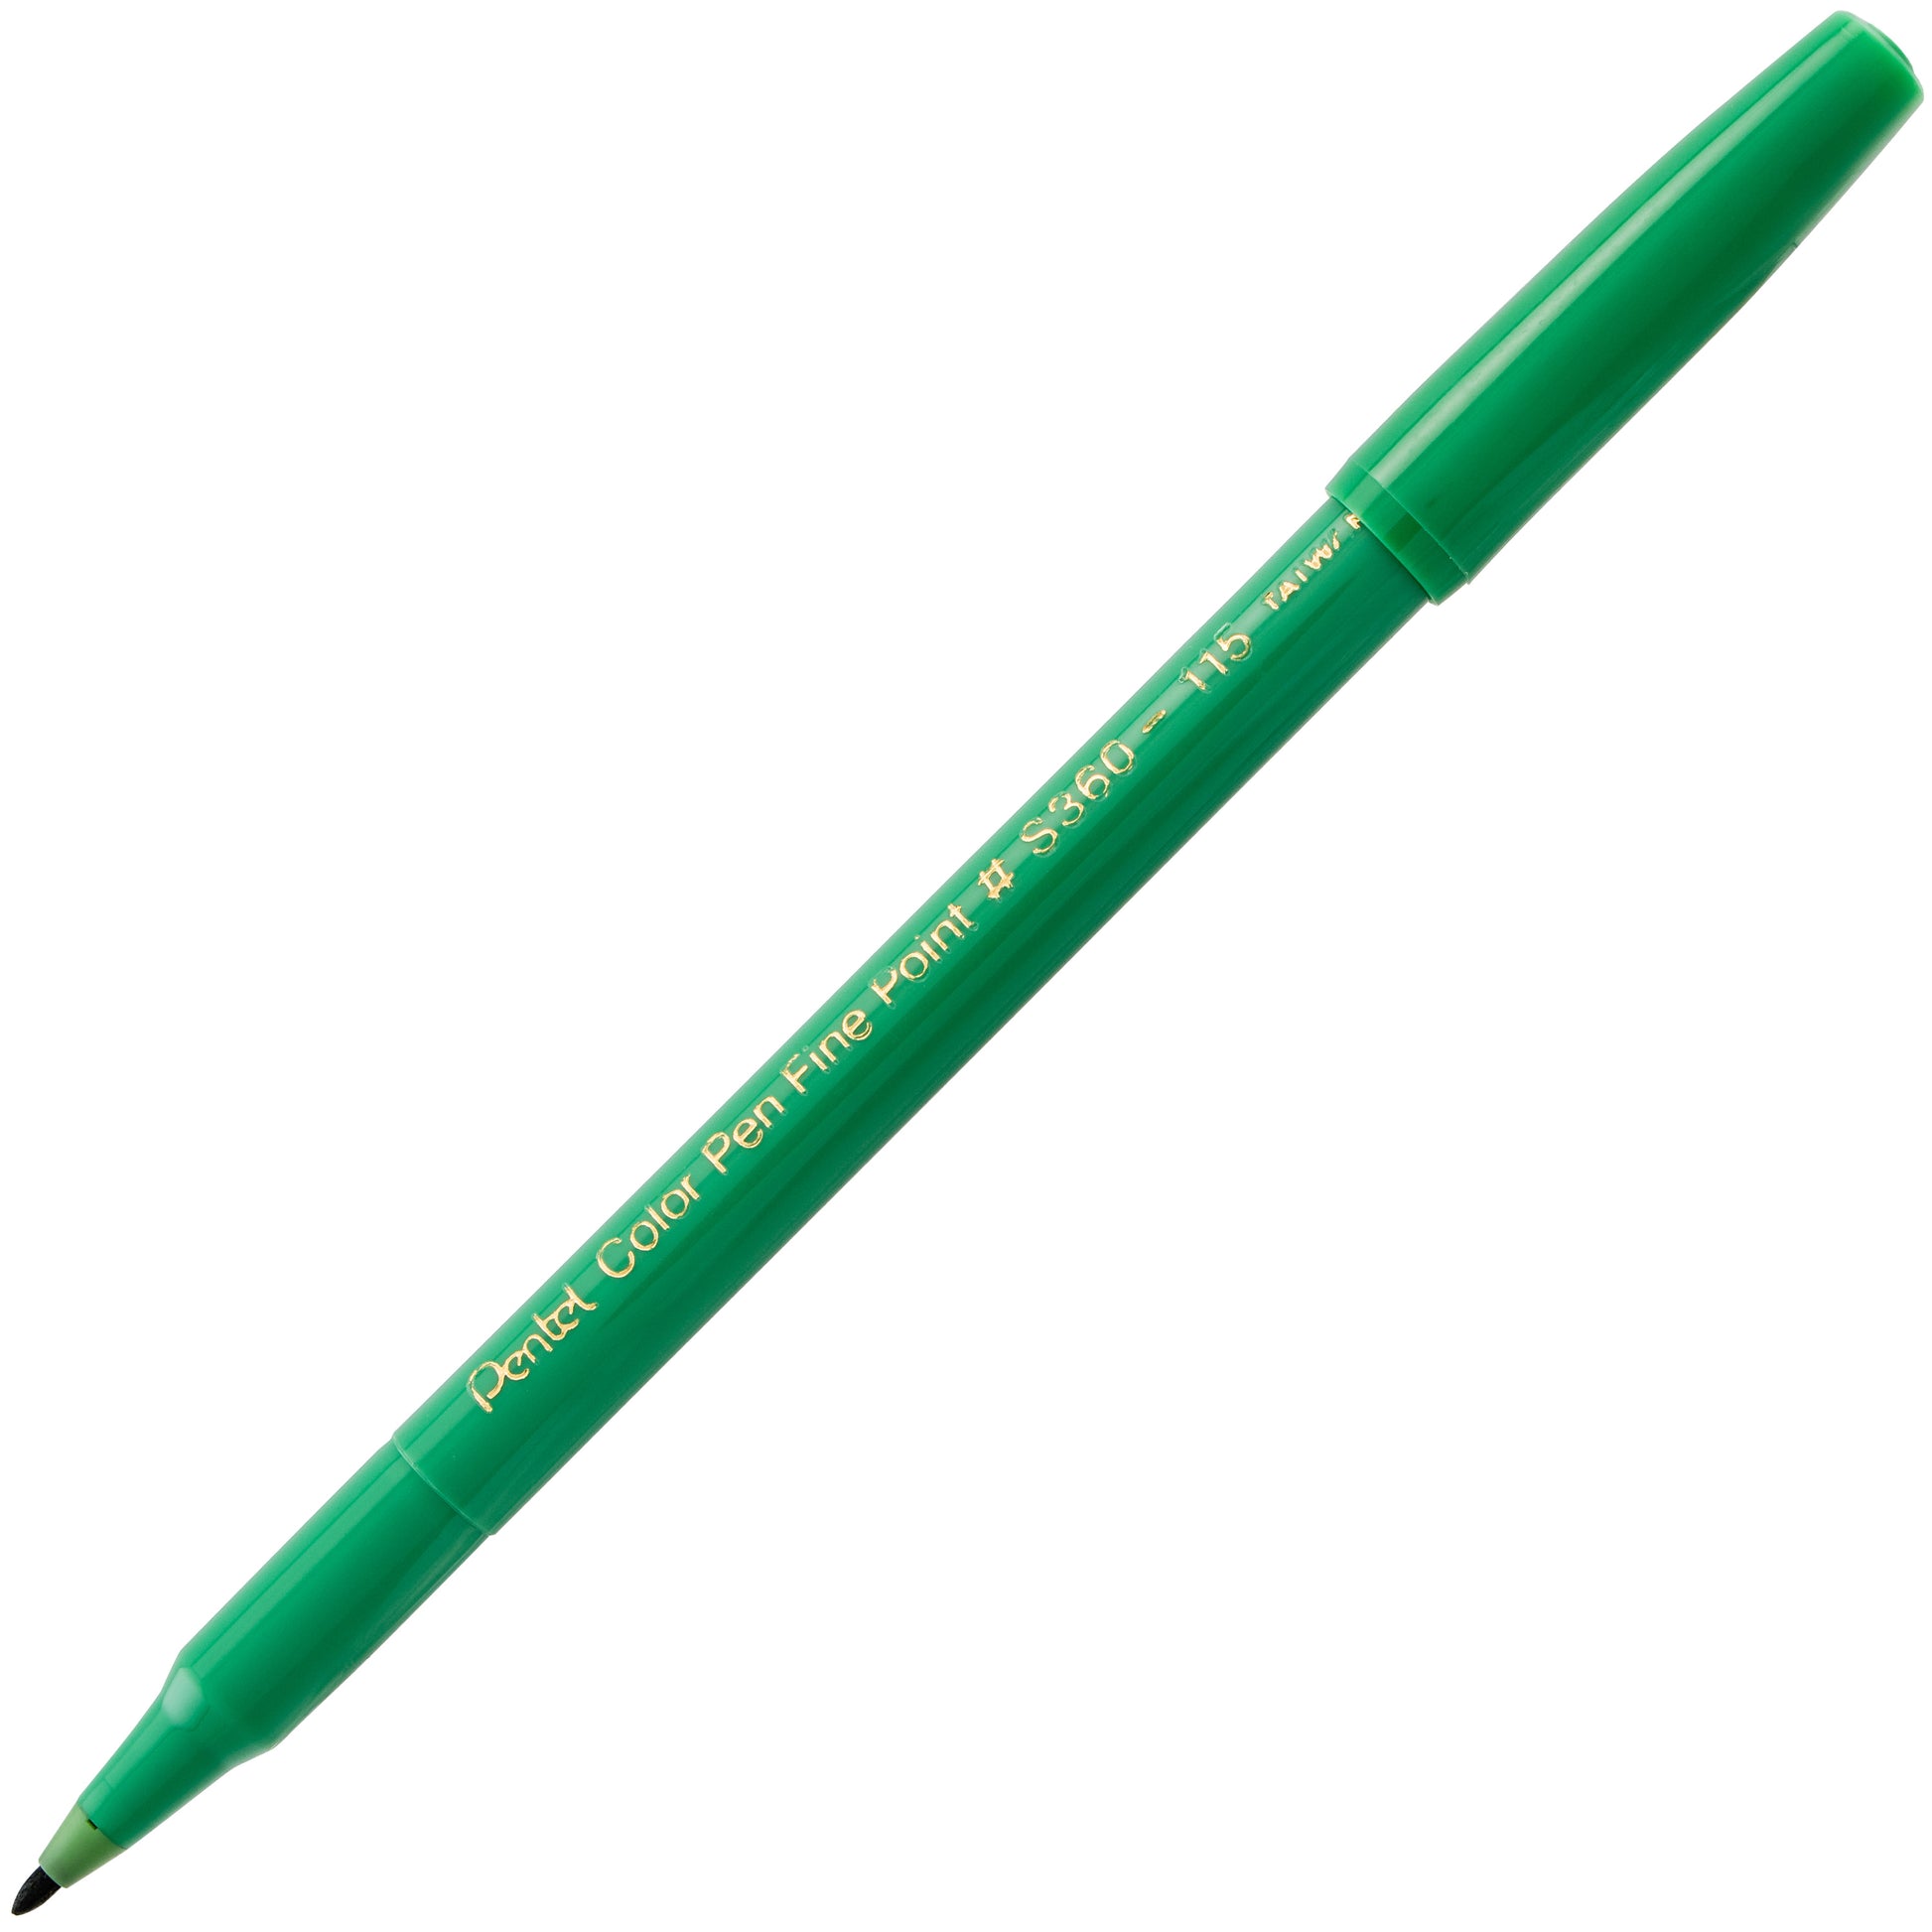  edding 1200 colour Pen Fine - Green - 10 Pens - Round Tip 1 mm  - Felt-Tip Pen for Drawing and Writing - for school or mandala : Office  Products